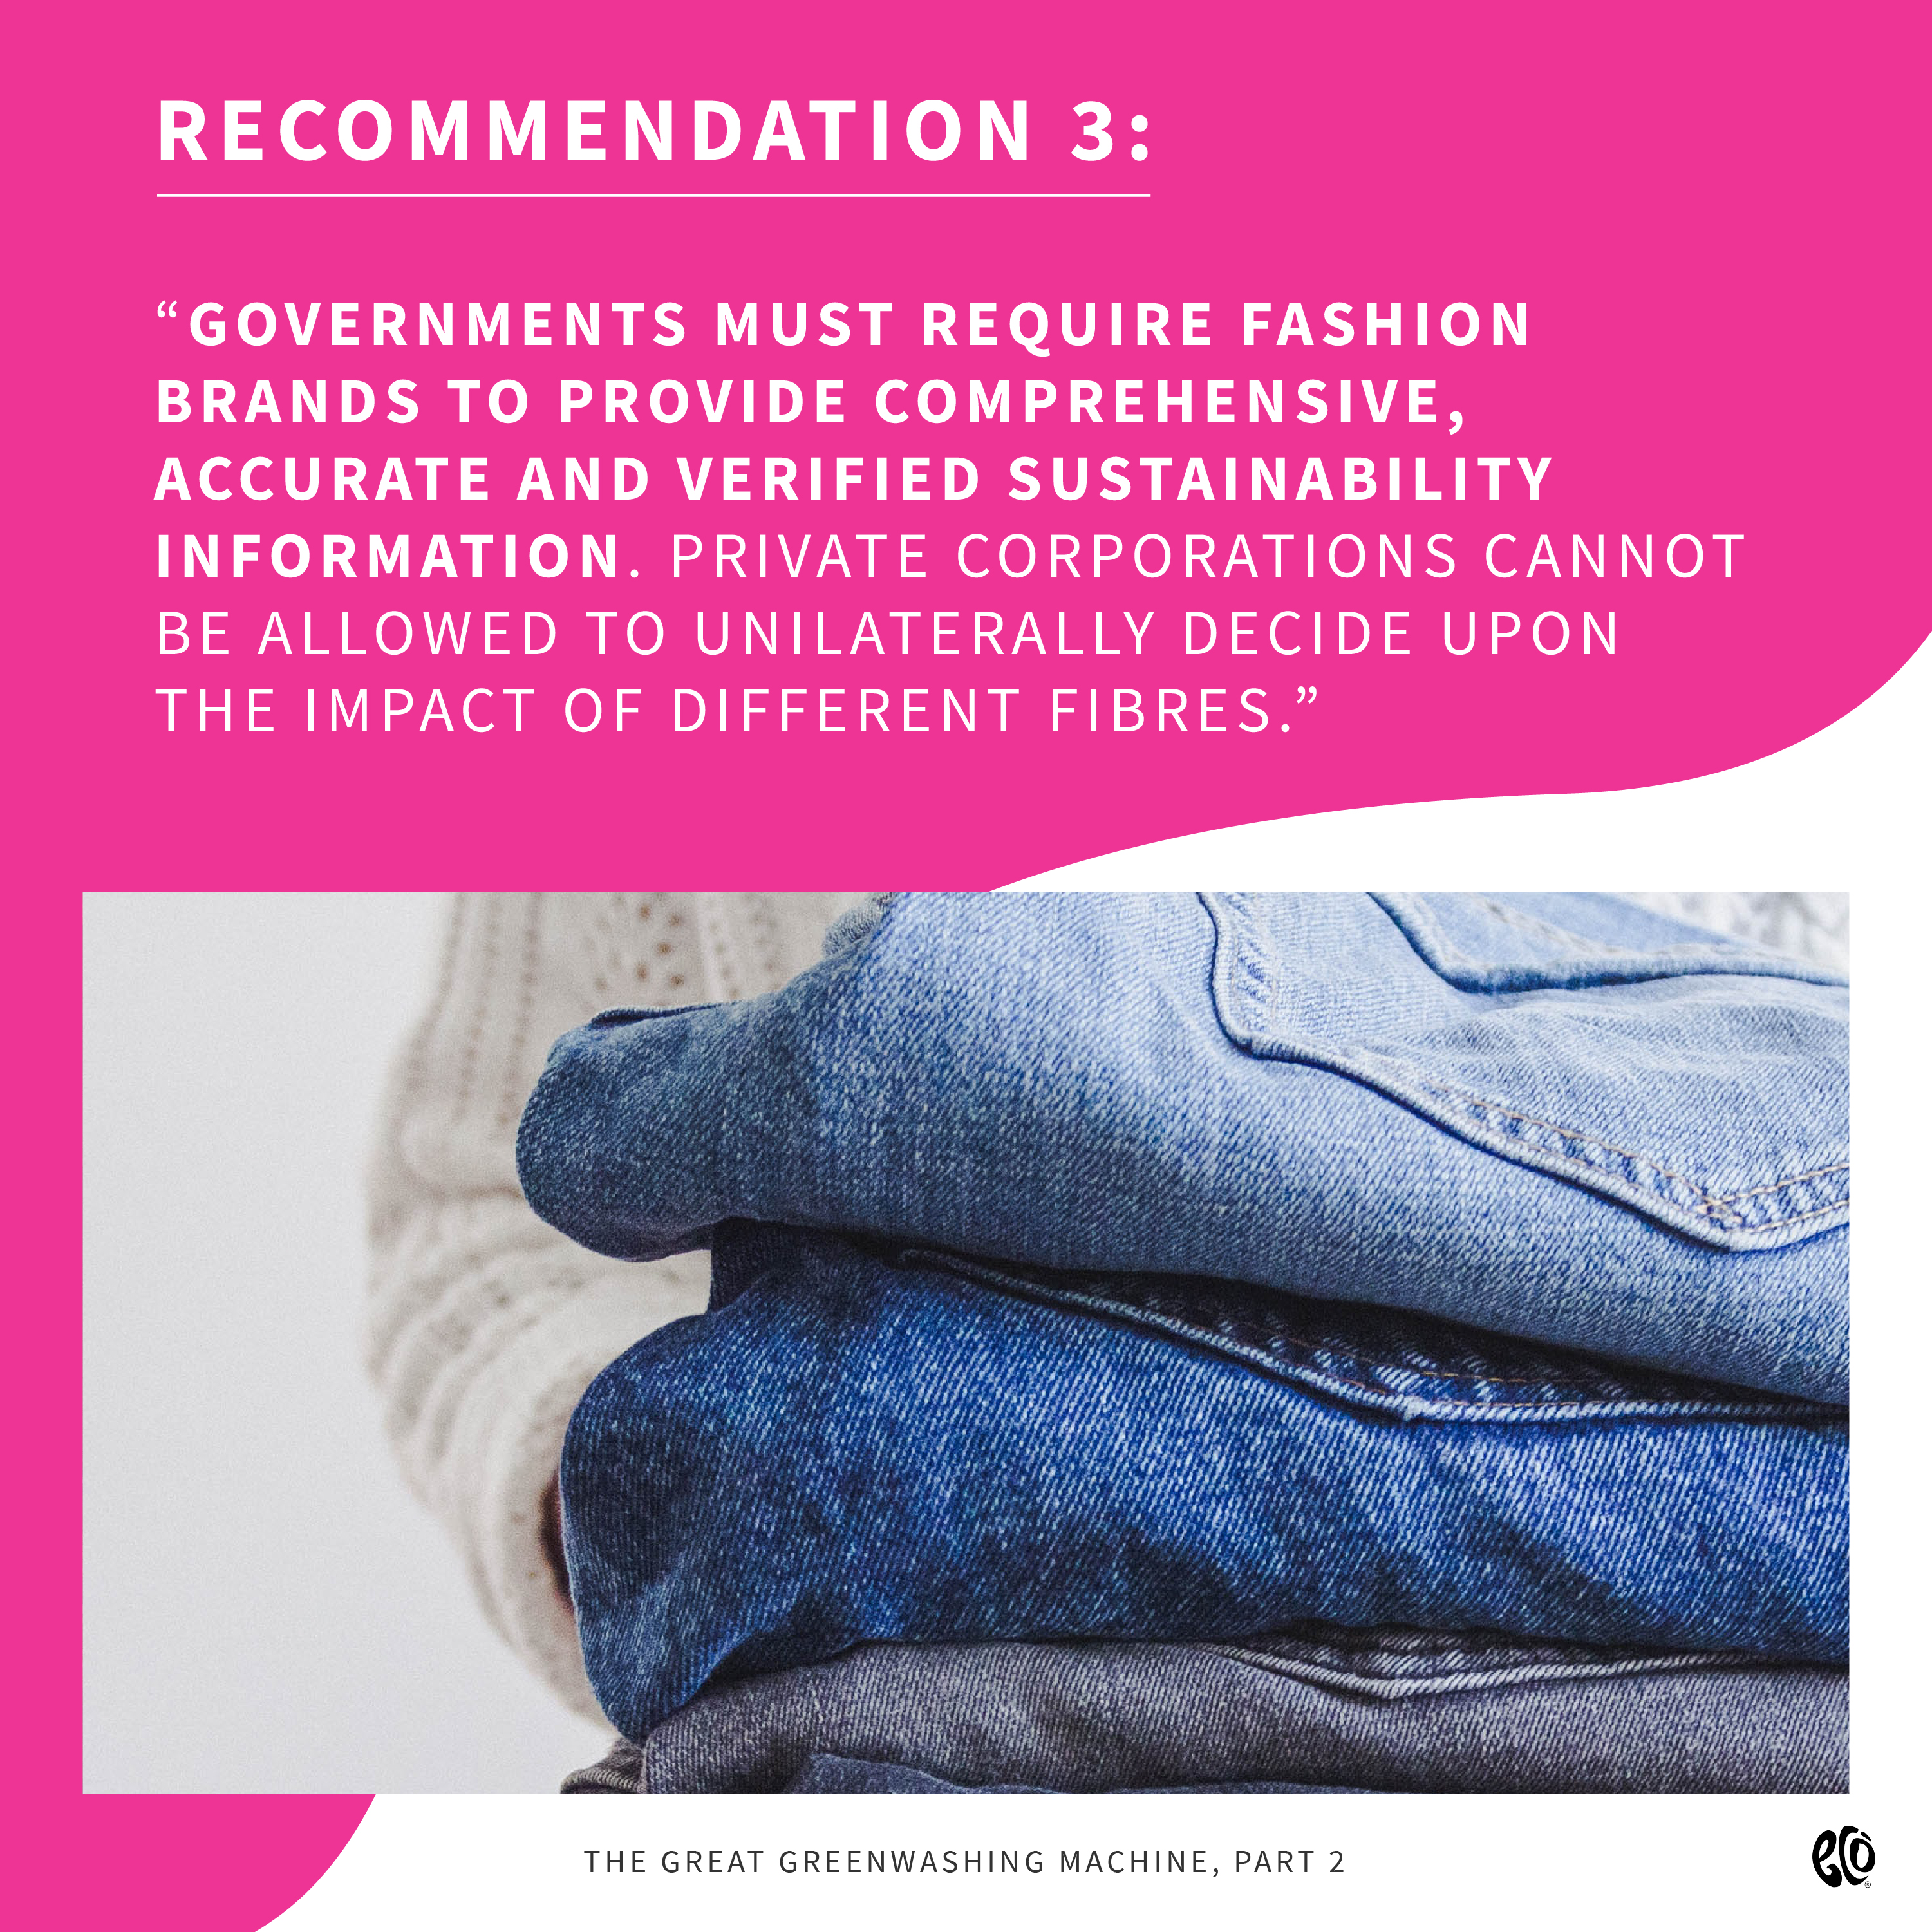 Recommendation 3